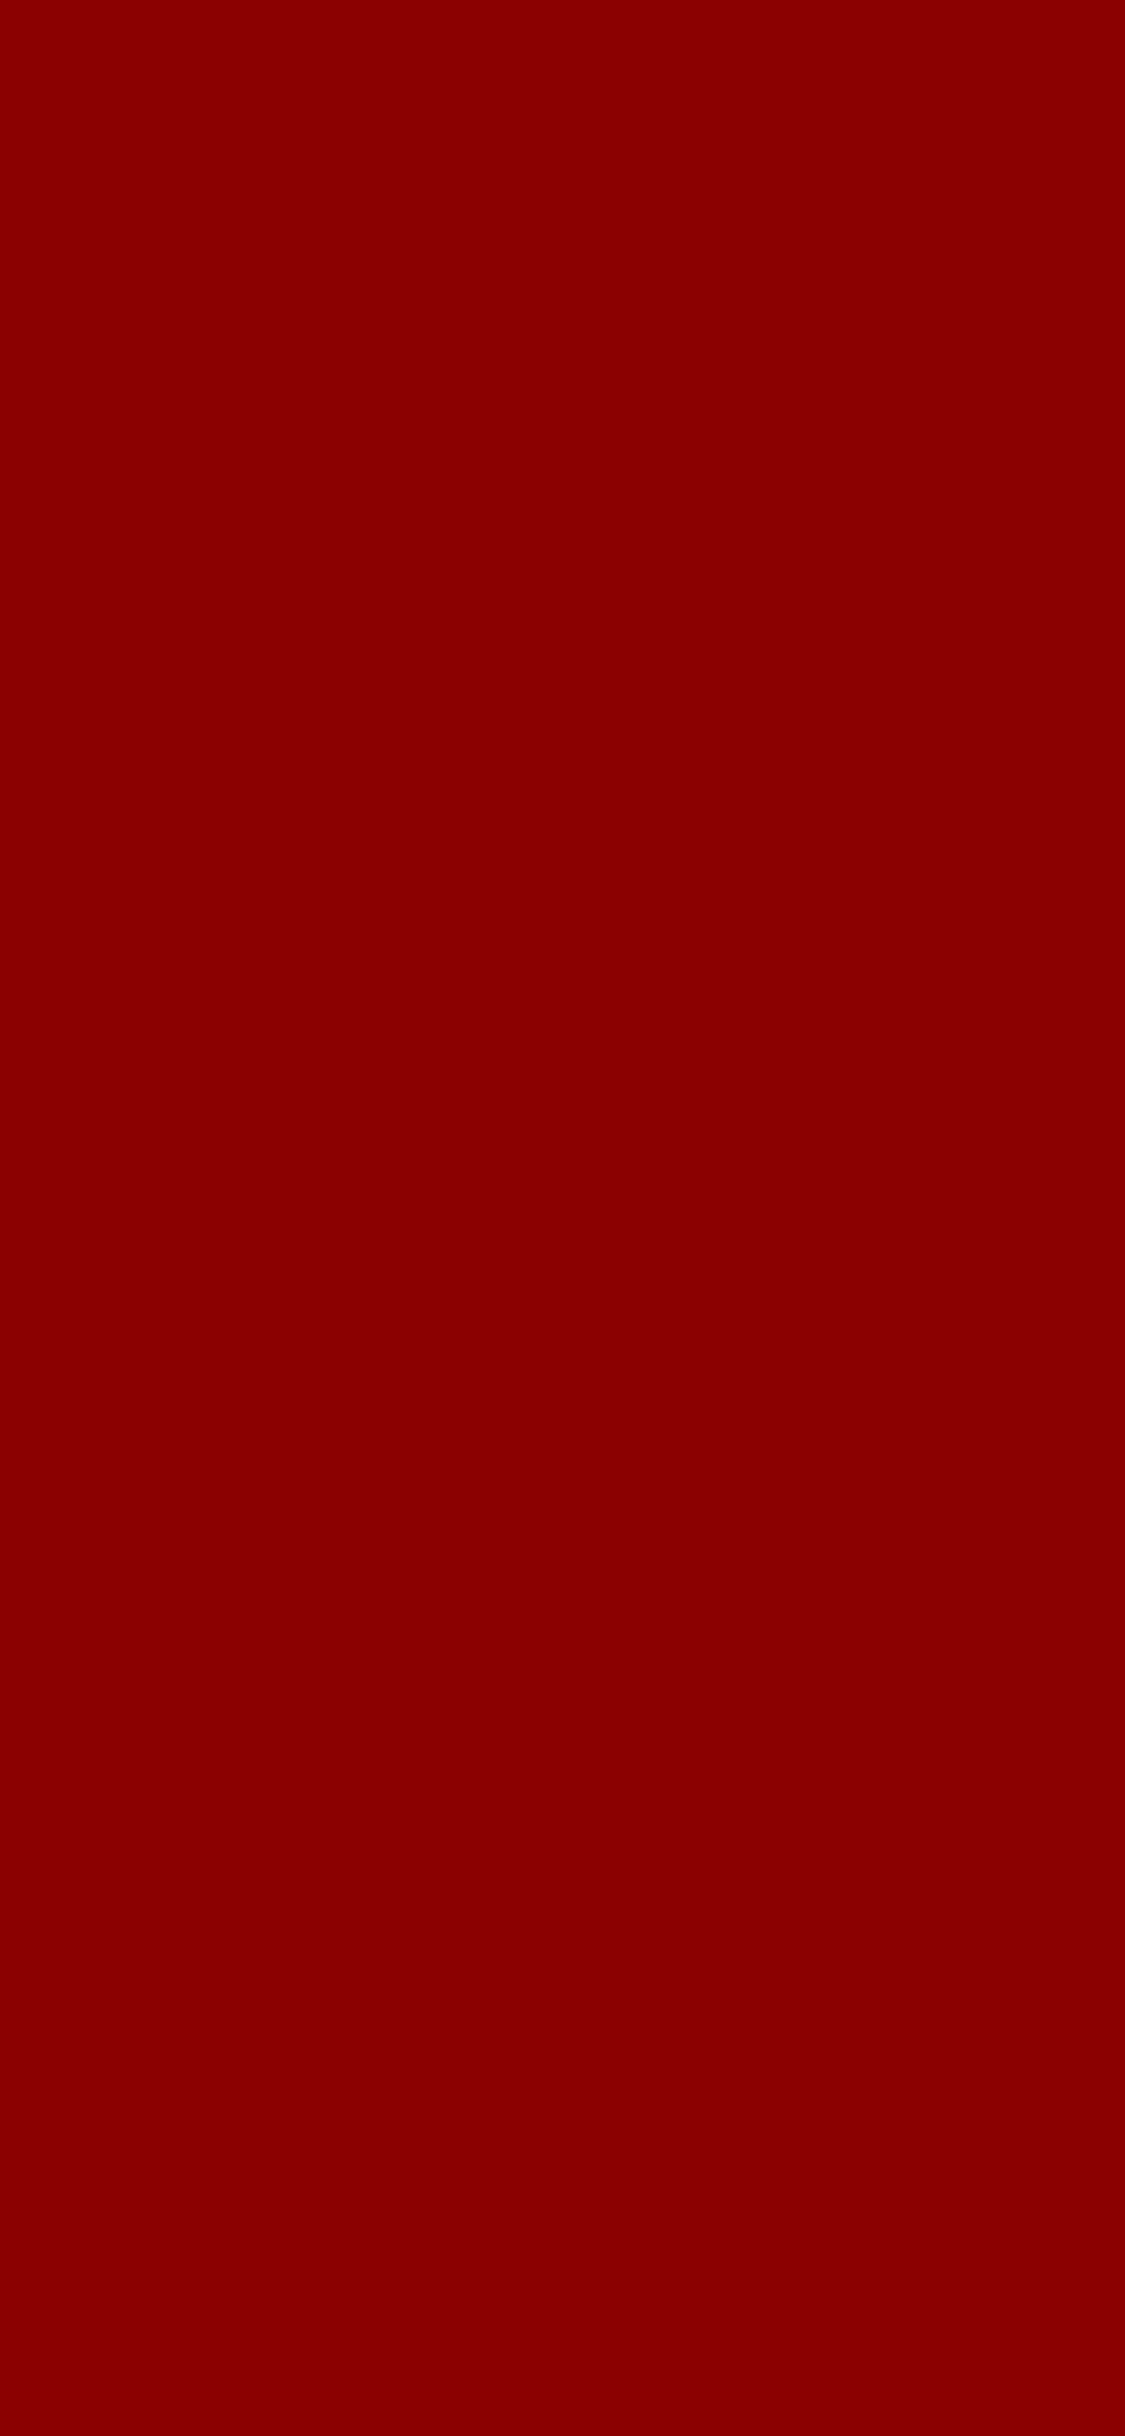 1125x2436 Dark Red Solid Color Background